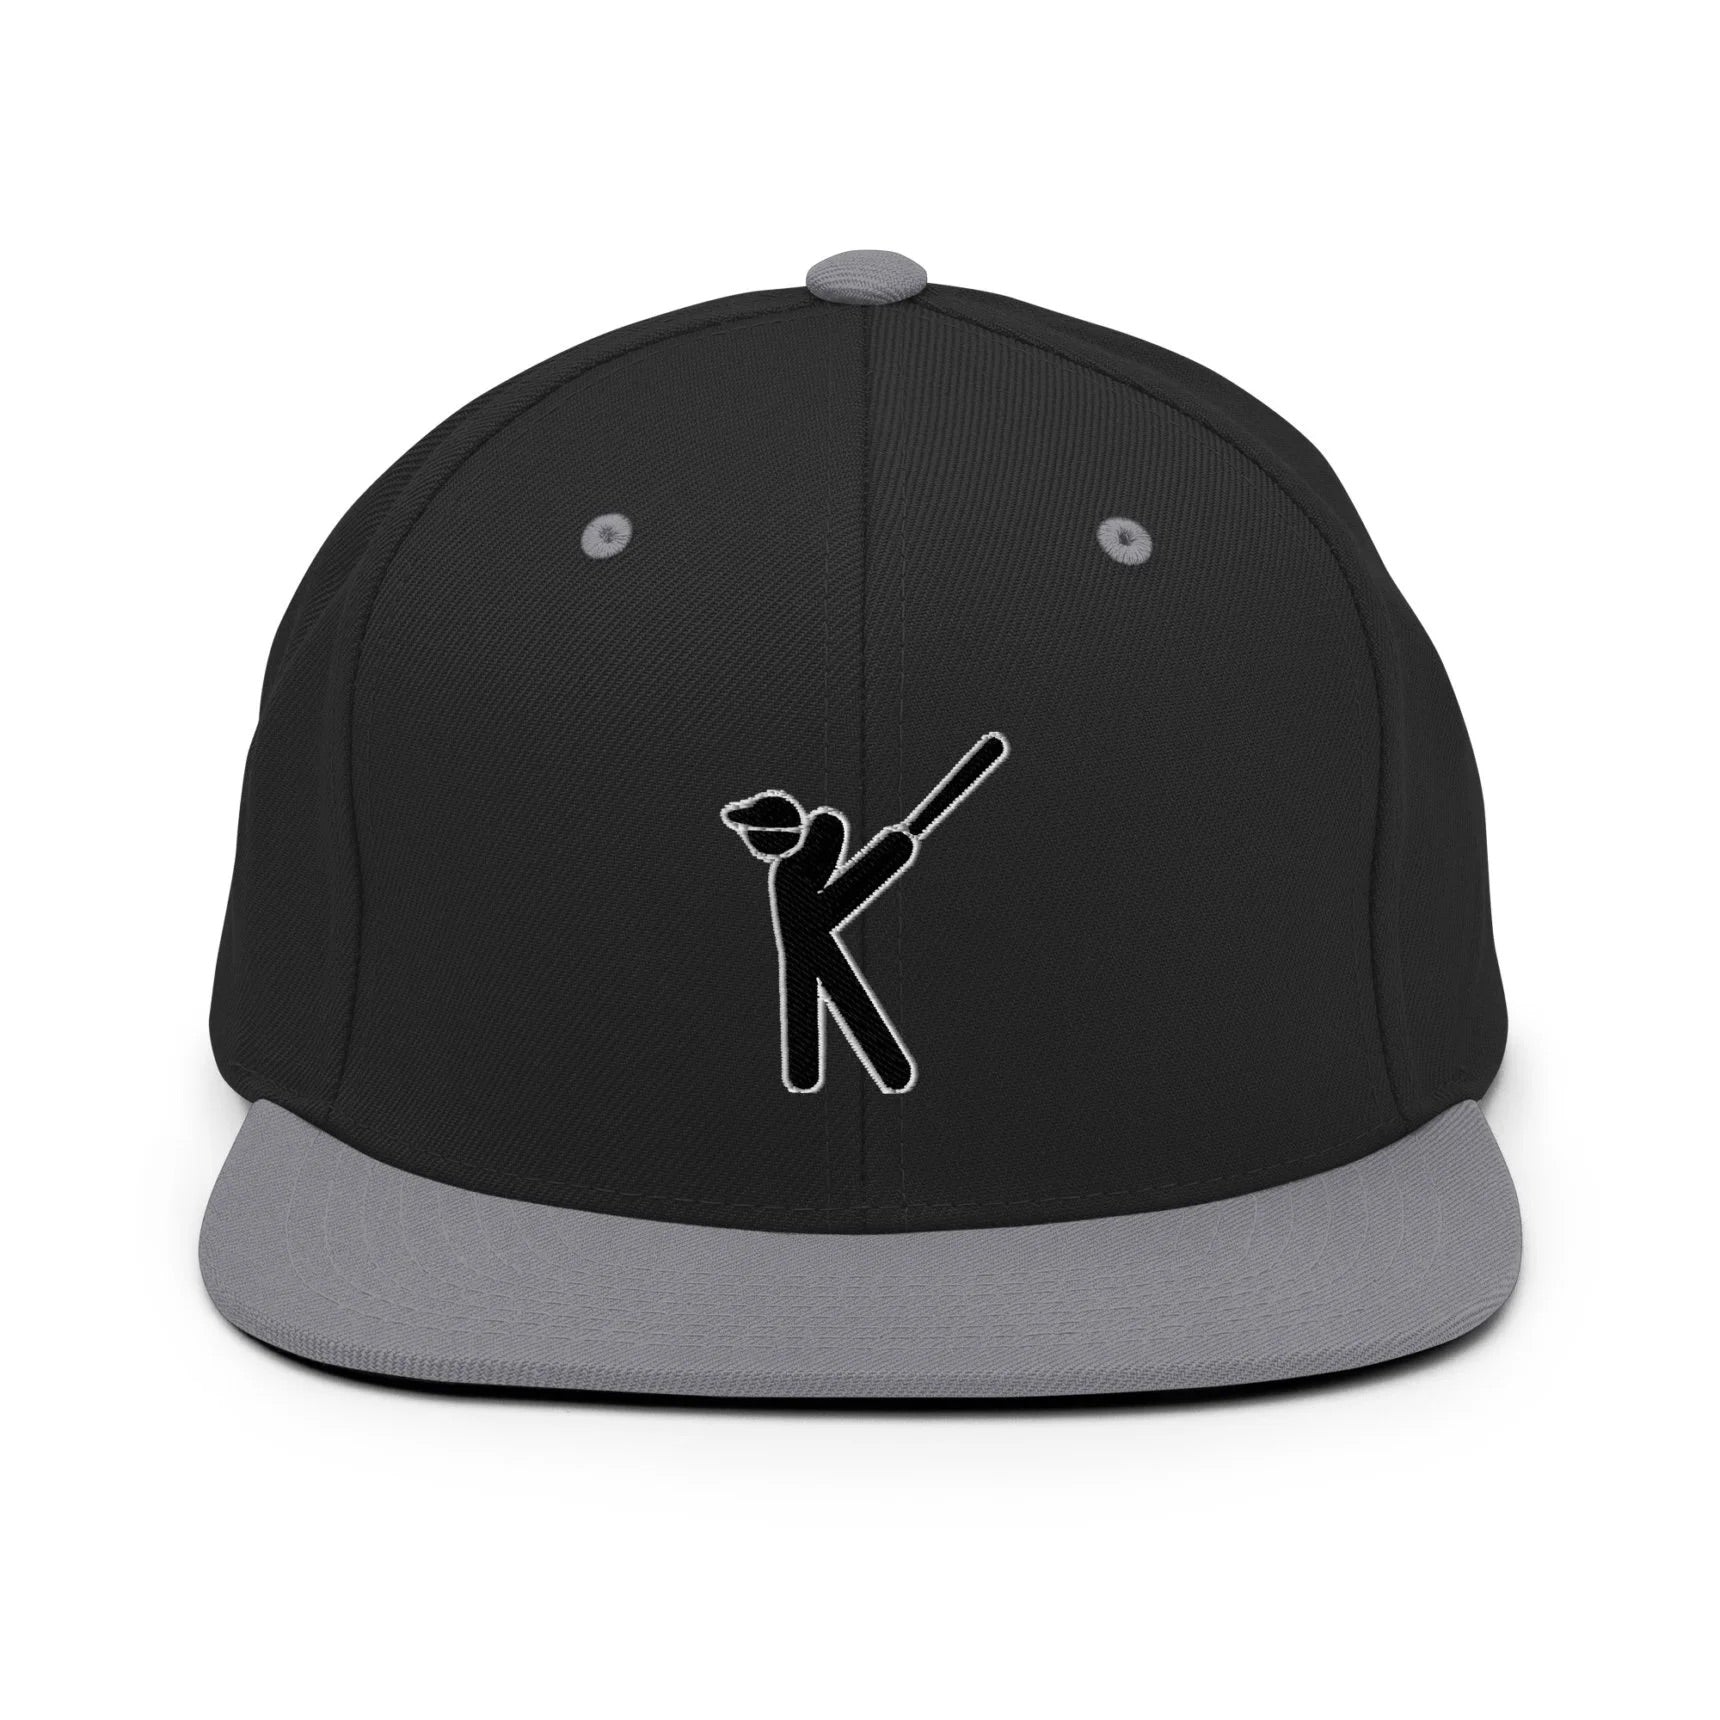 Kasabe ShowZone snapback hat in black with grey brim and accents